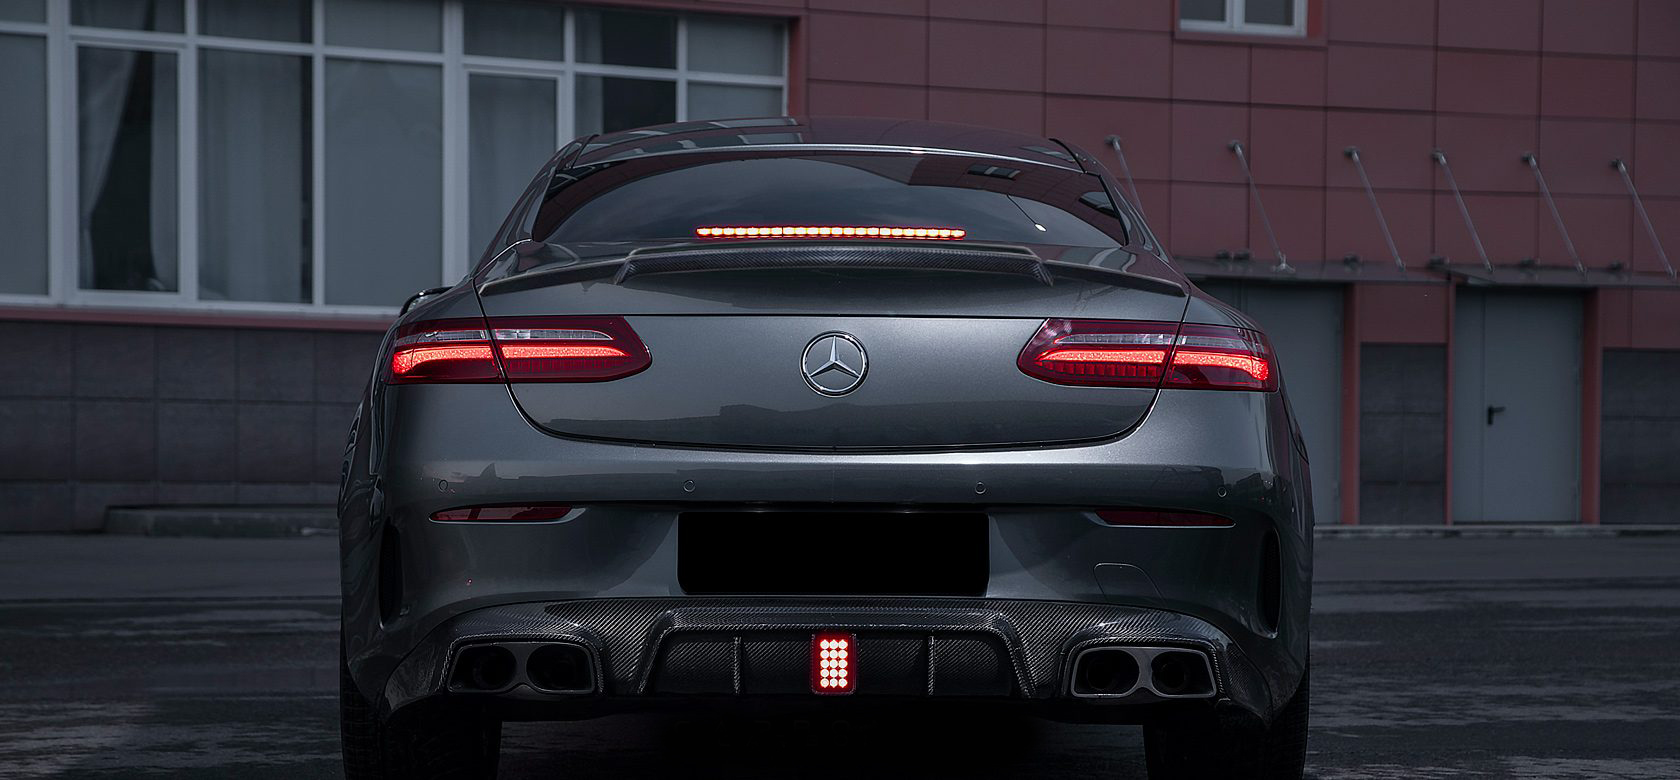 Hodoor Performance Carbon Fiber Rear Spoiler Inserts for Mercedes E-class Coupe